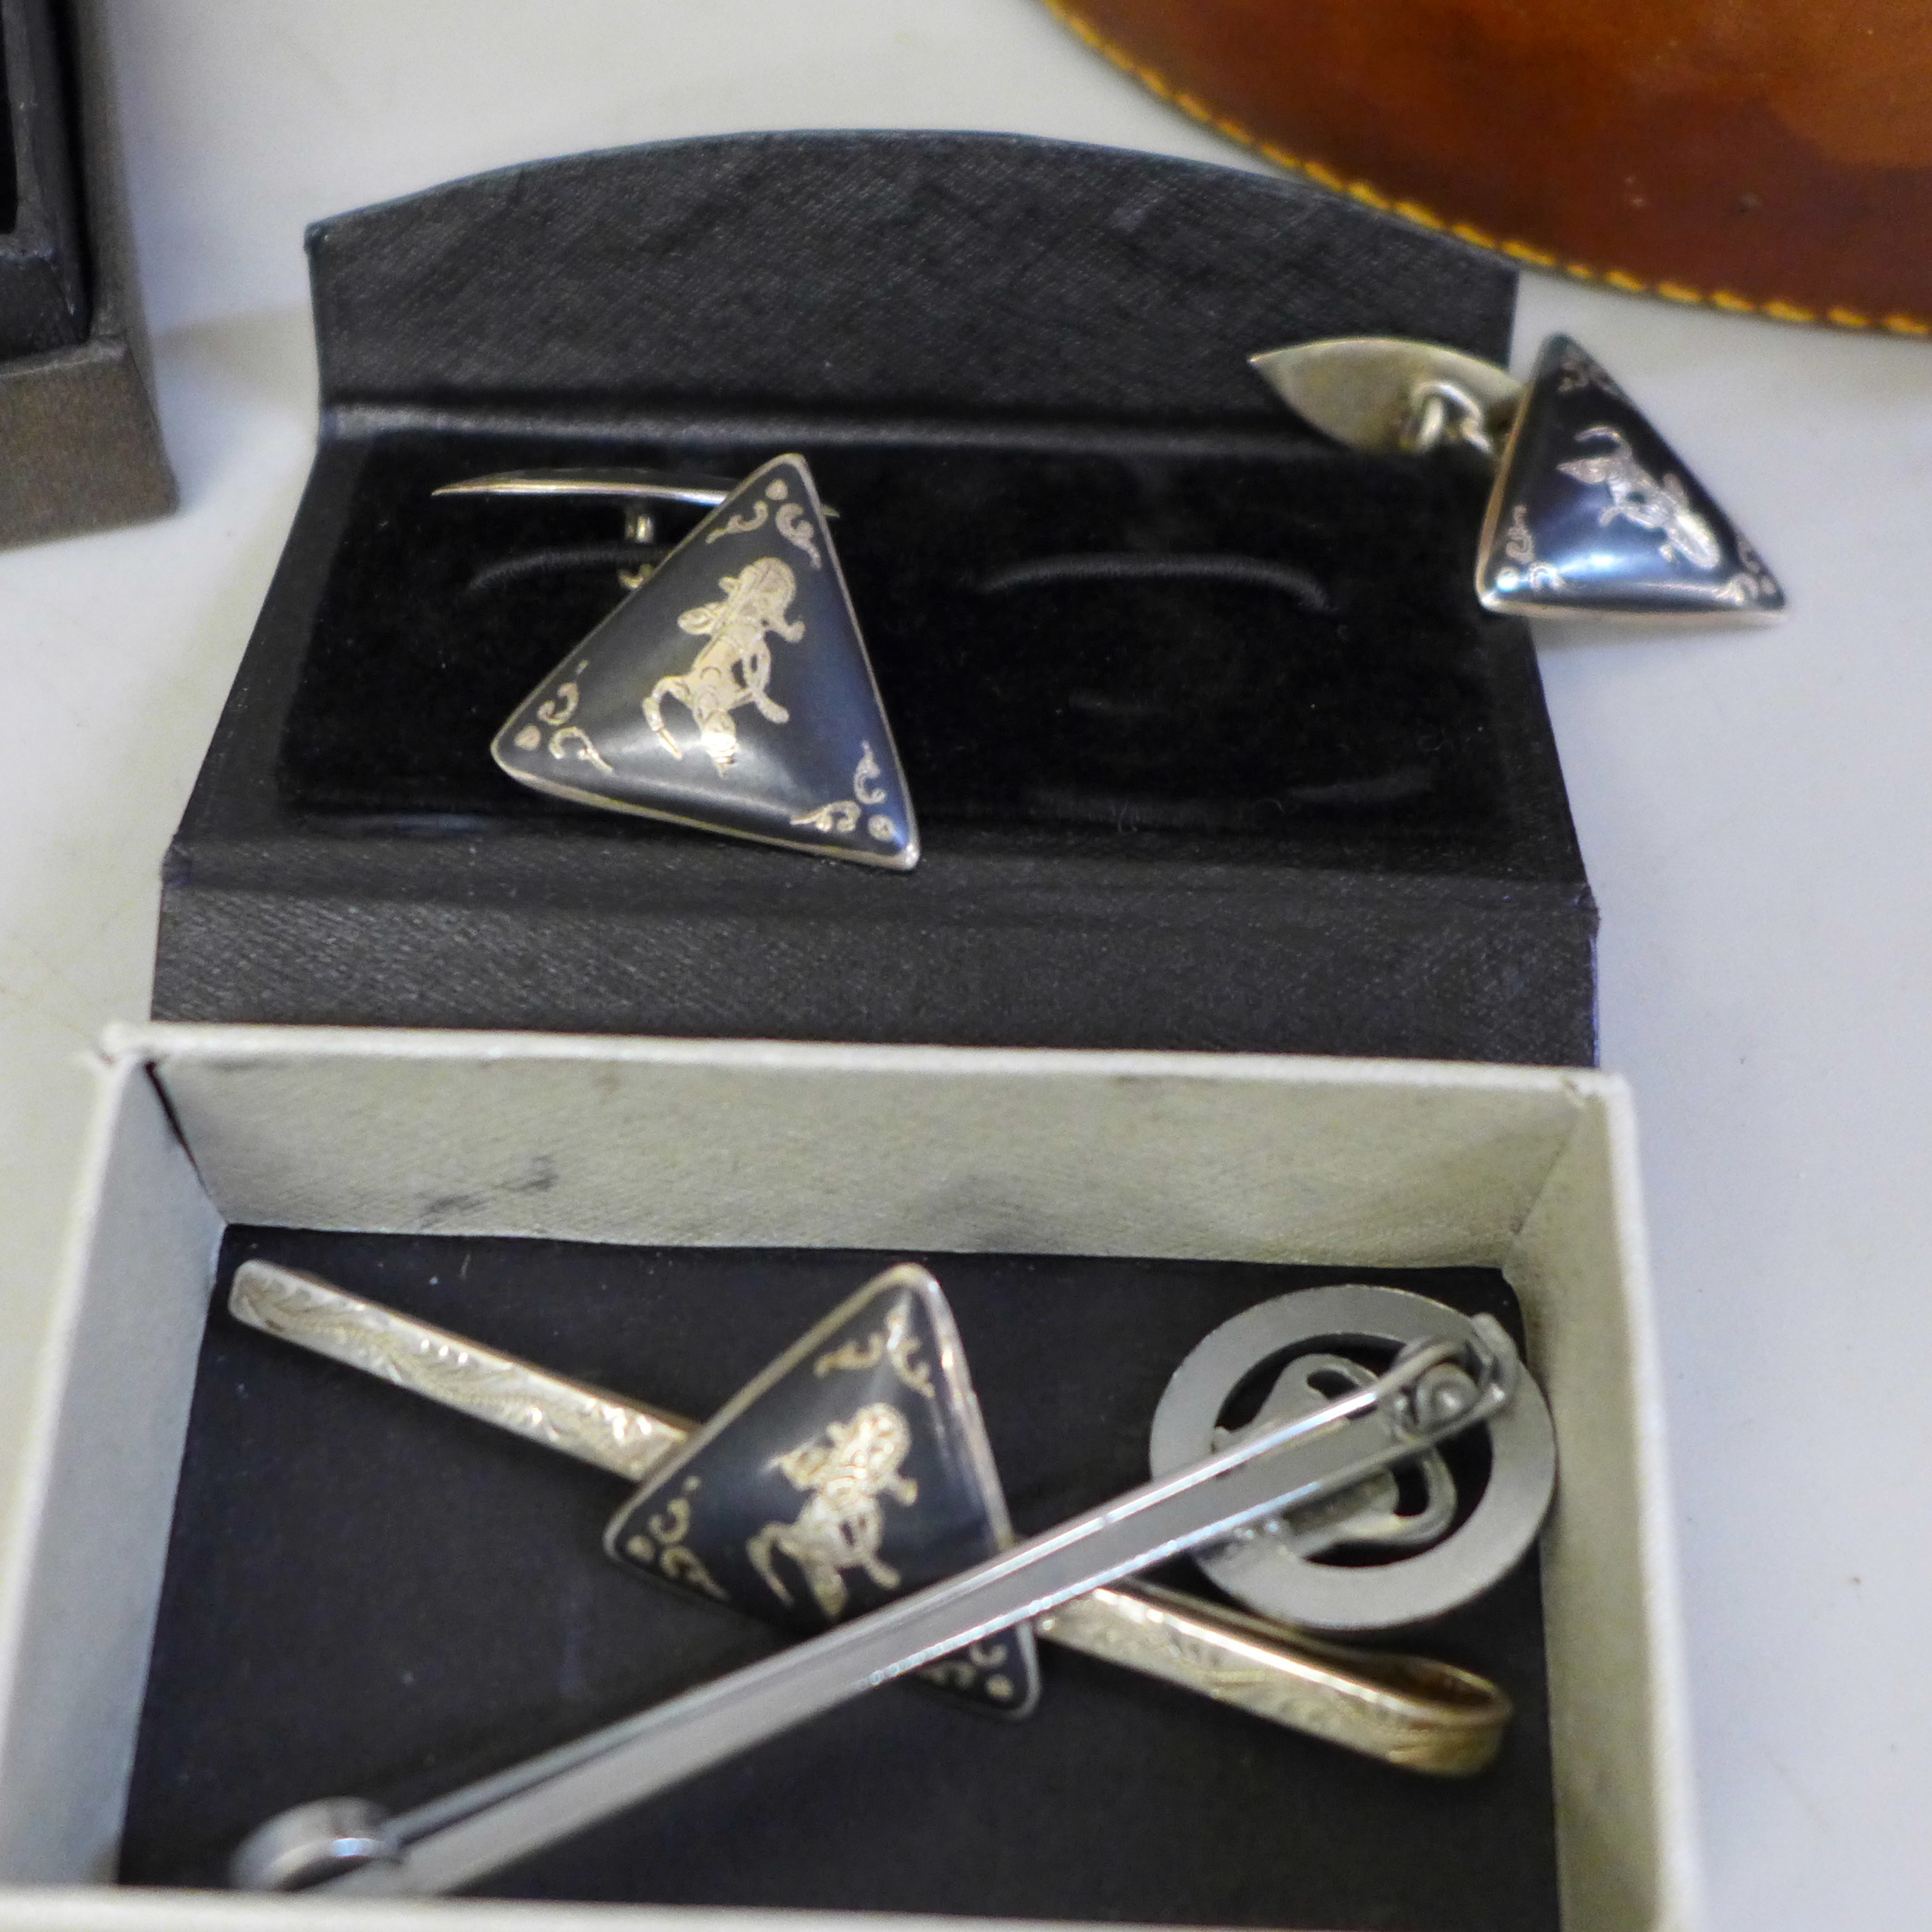 A leather collar box, sets of cufflinks etc., including a sterling silver Siam cufflink and tie - Image 3 of 6